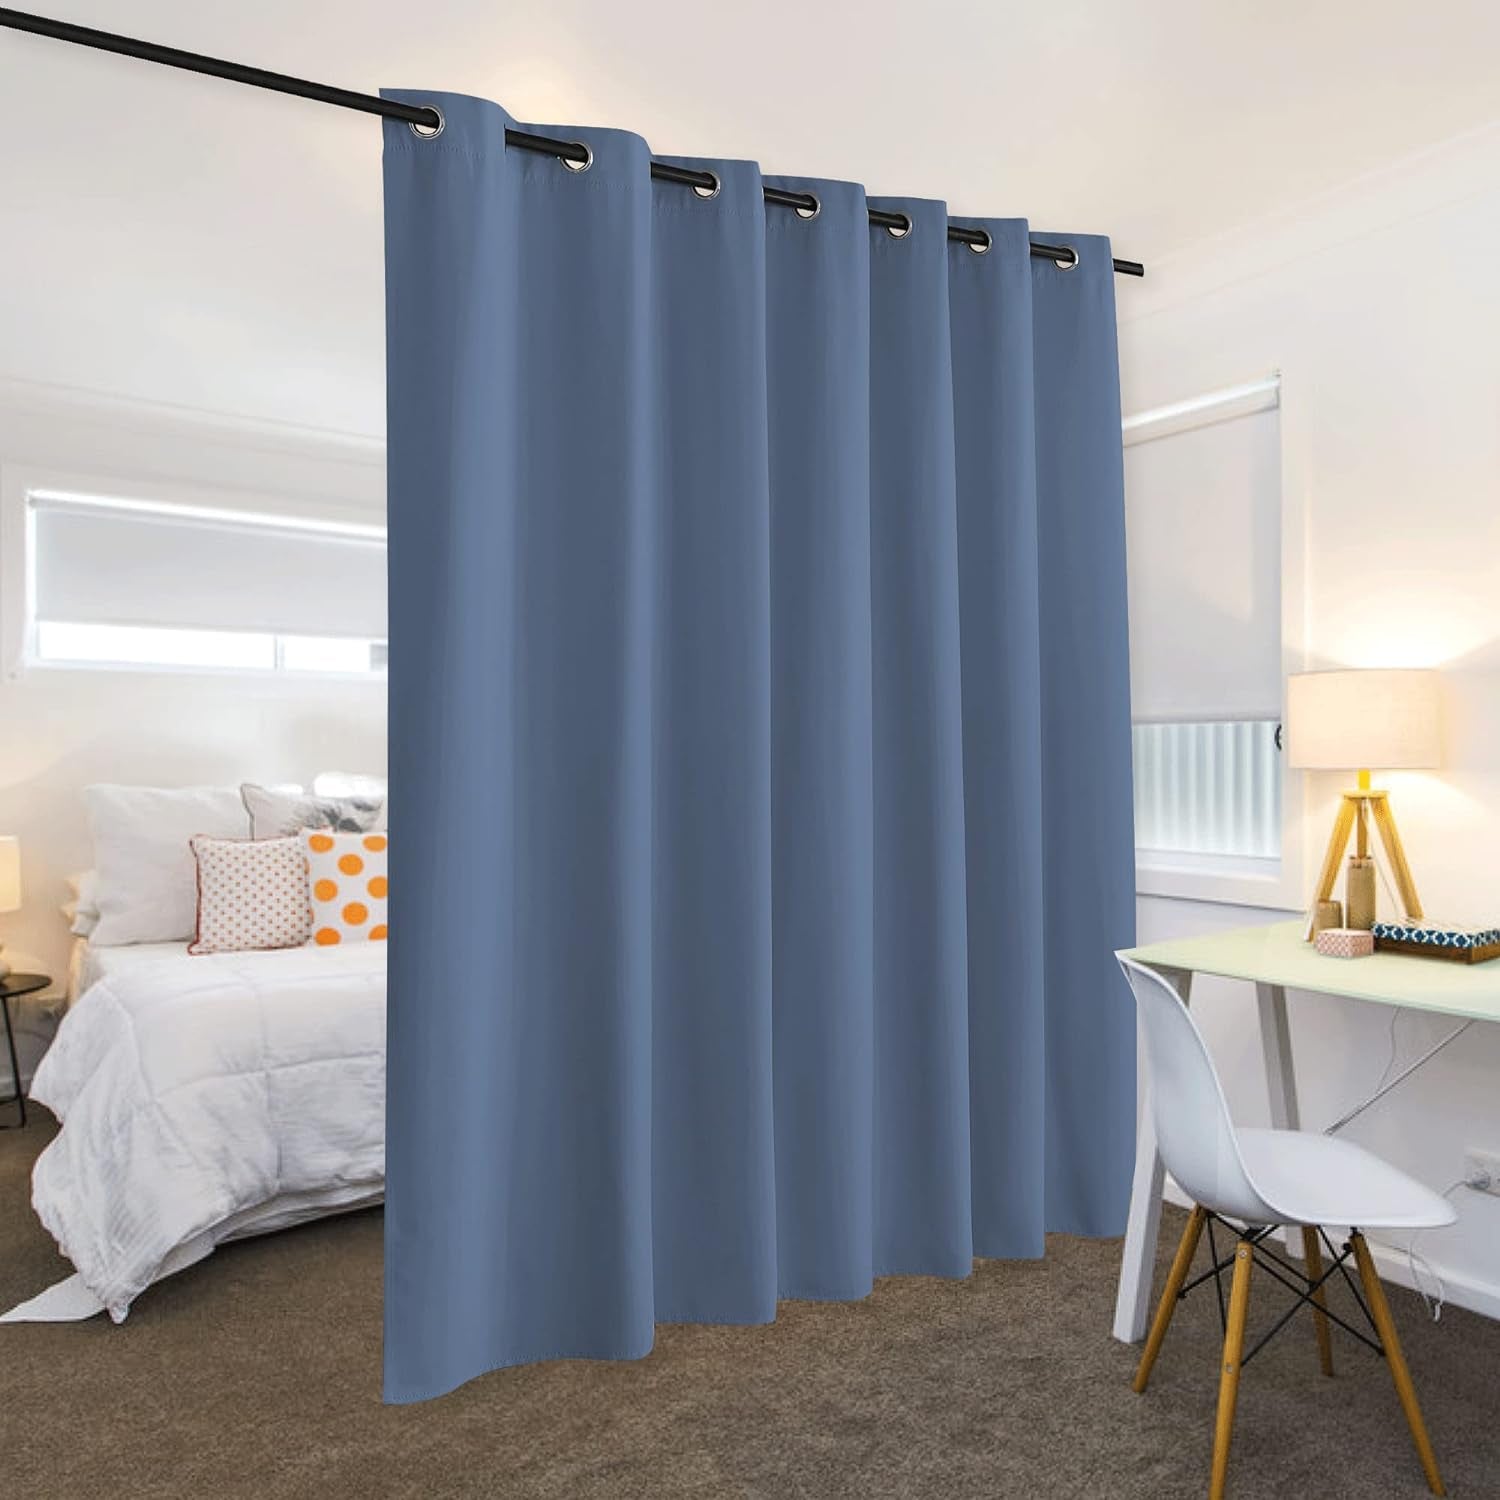 RYB HOME Blackout Patio Sliding Door Curtains - Thermal Insulated Stone Blue Backdrops for Parties Total Privacy Room Darkening Partition Curtains for Shared Room Office, W100 X L84 Inch, 1 Panel  RYB HOME   